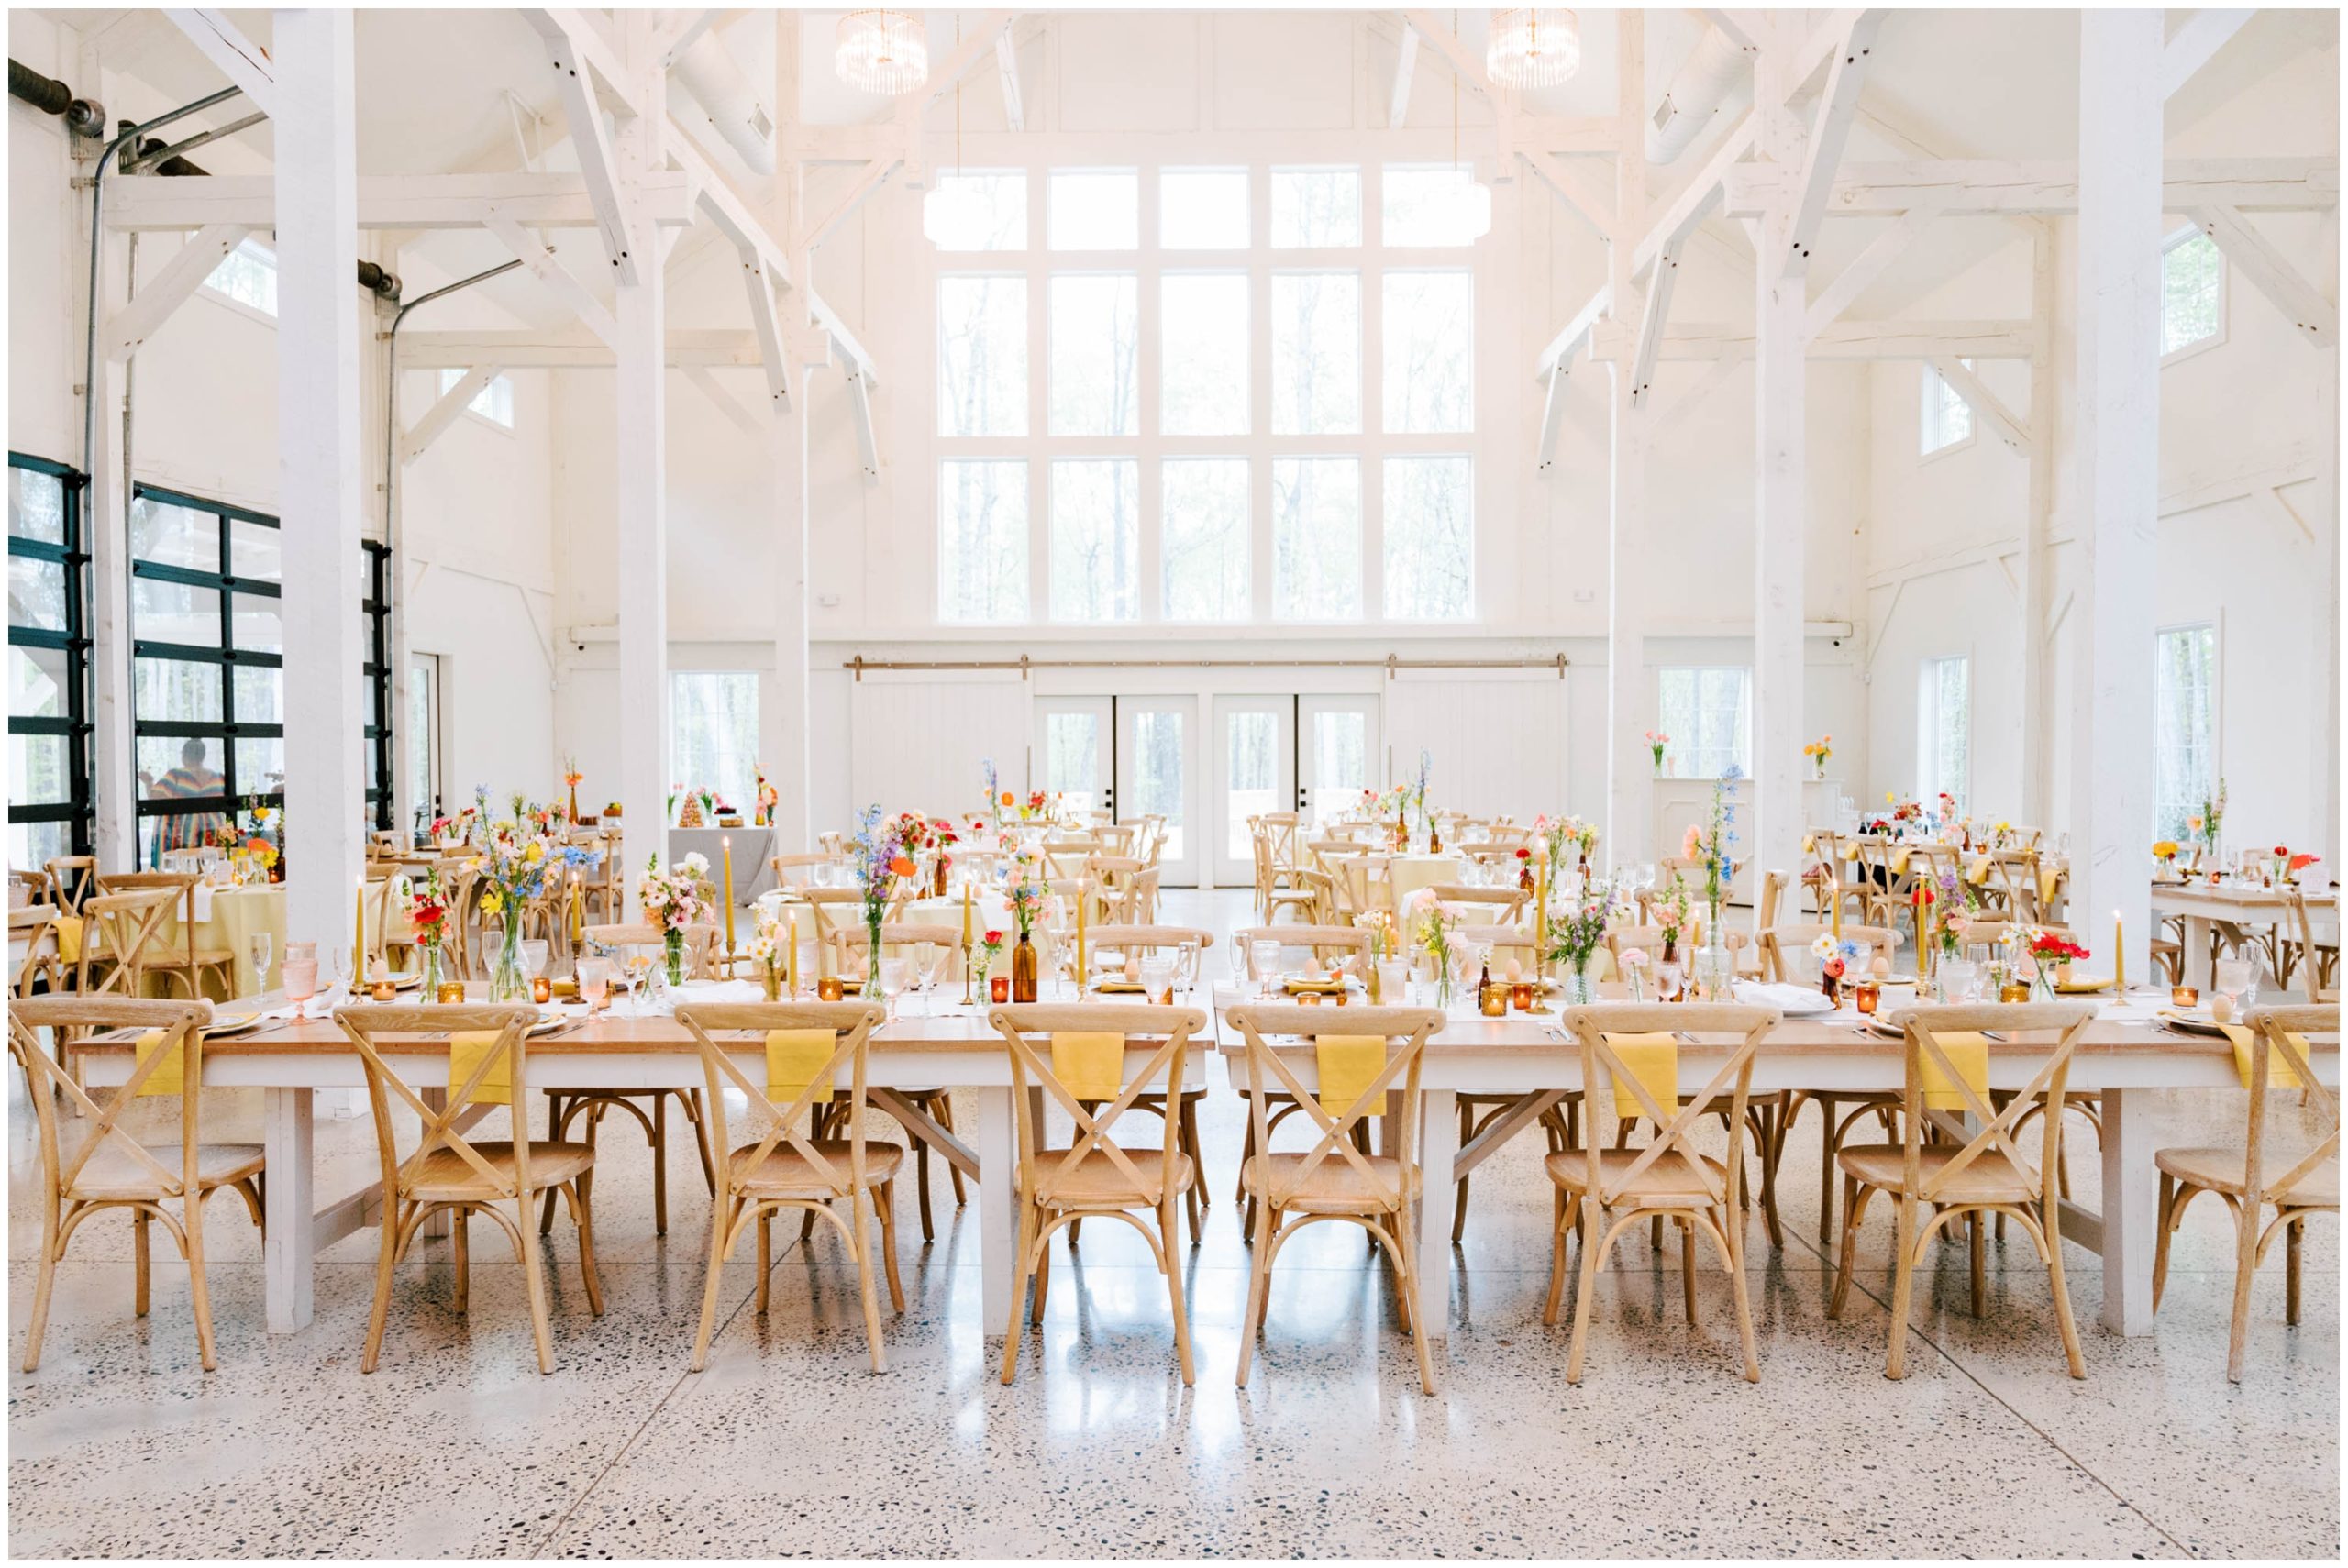 White and yellow table linens, amber votives, and colorful florals for a spring wedding reception